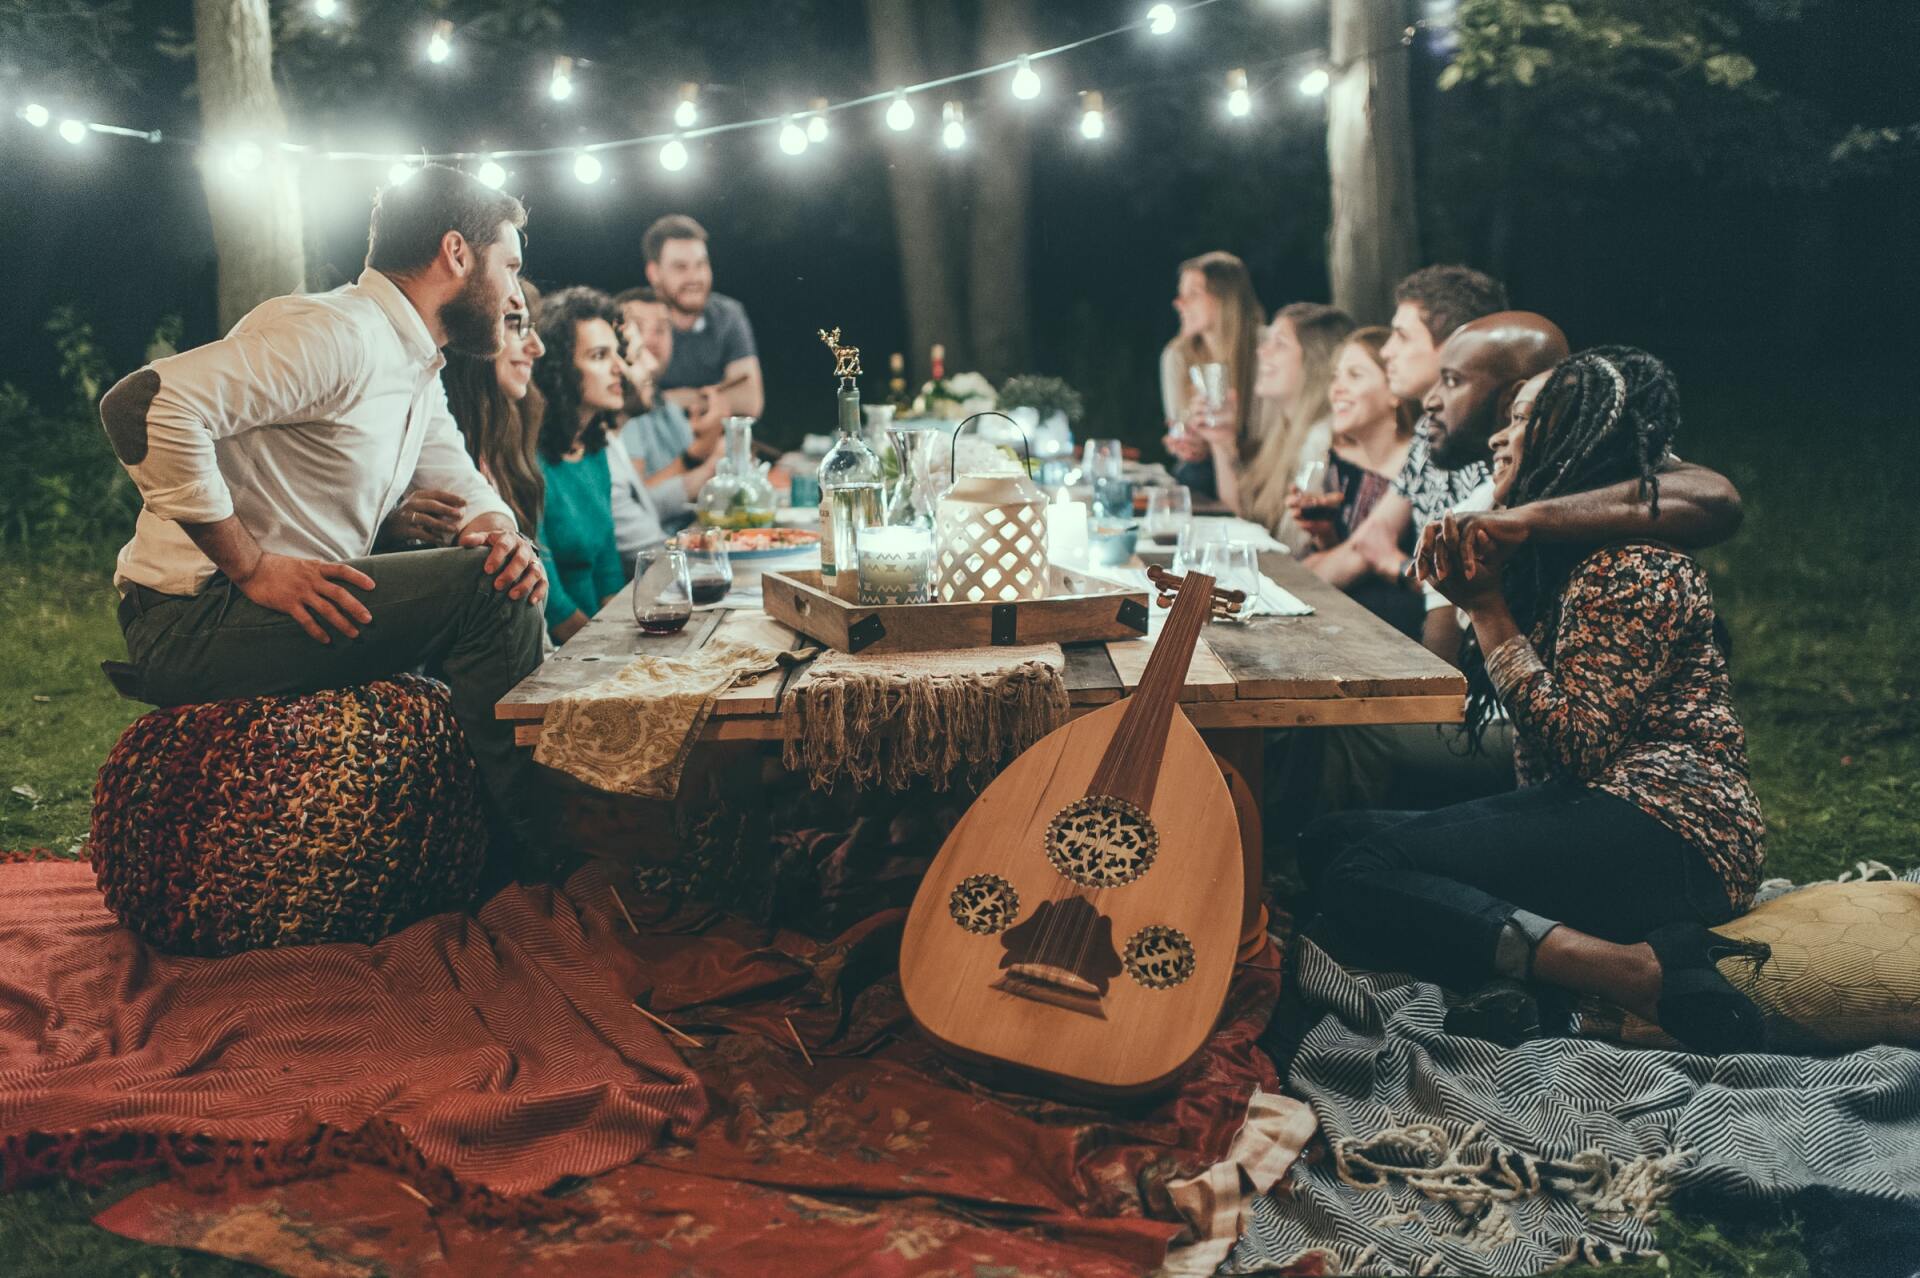 Backyard Party at Night Time | Green Garden Landscaping